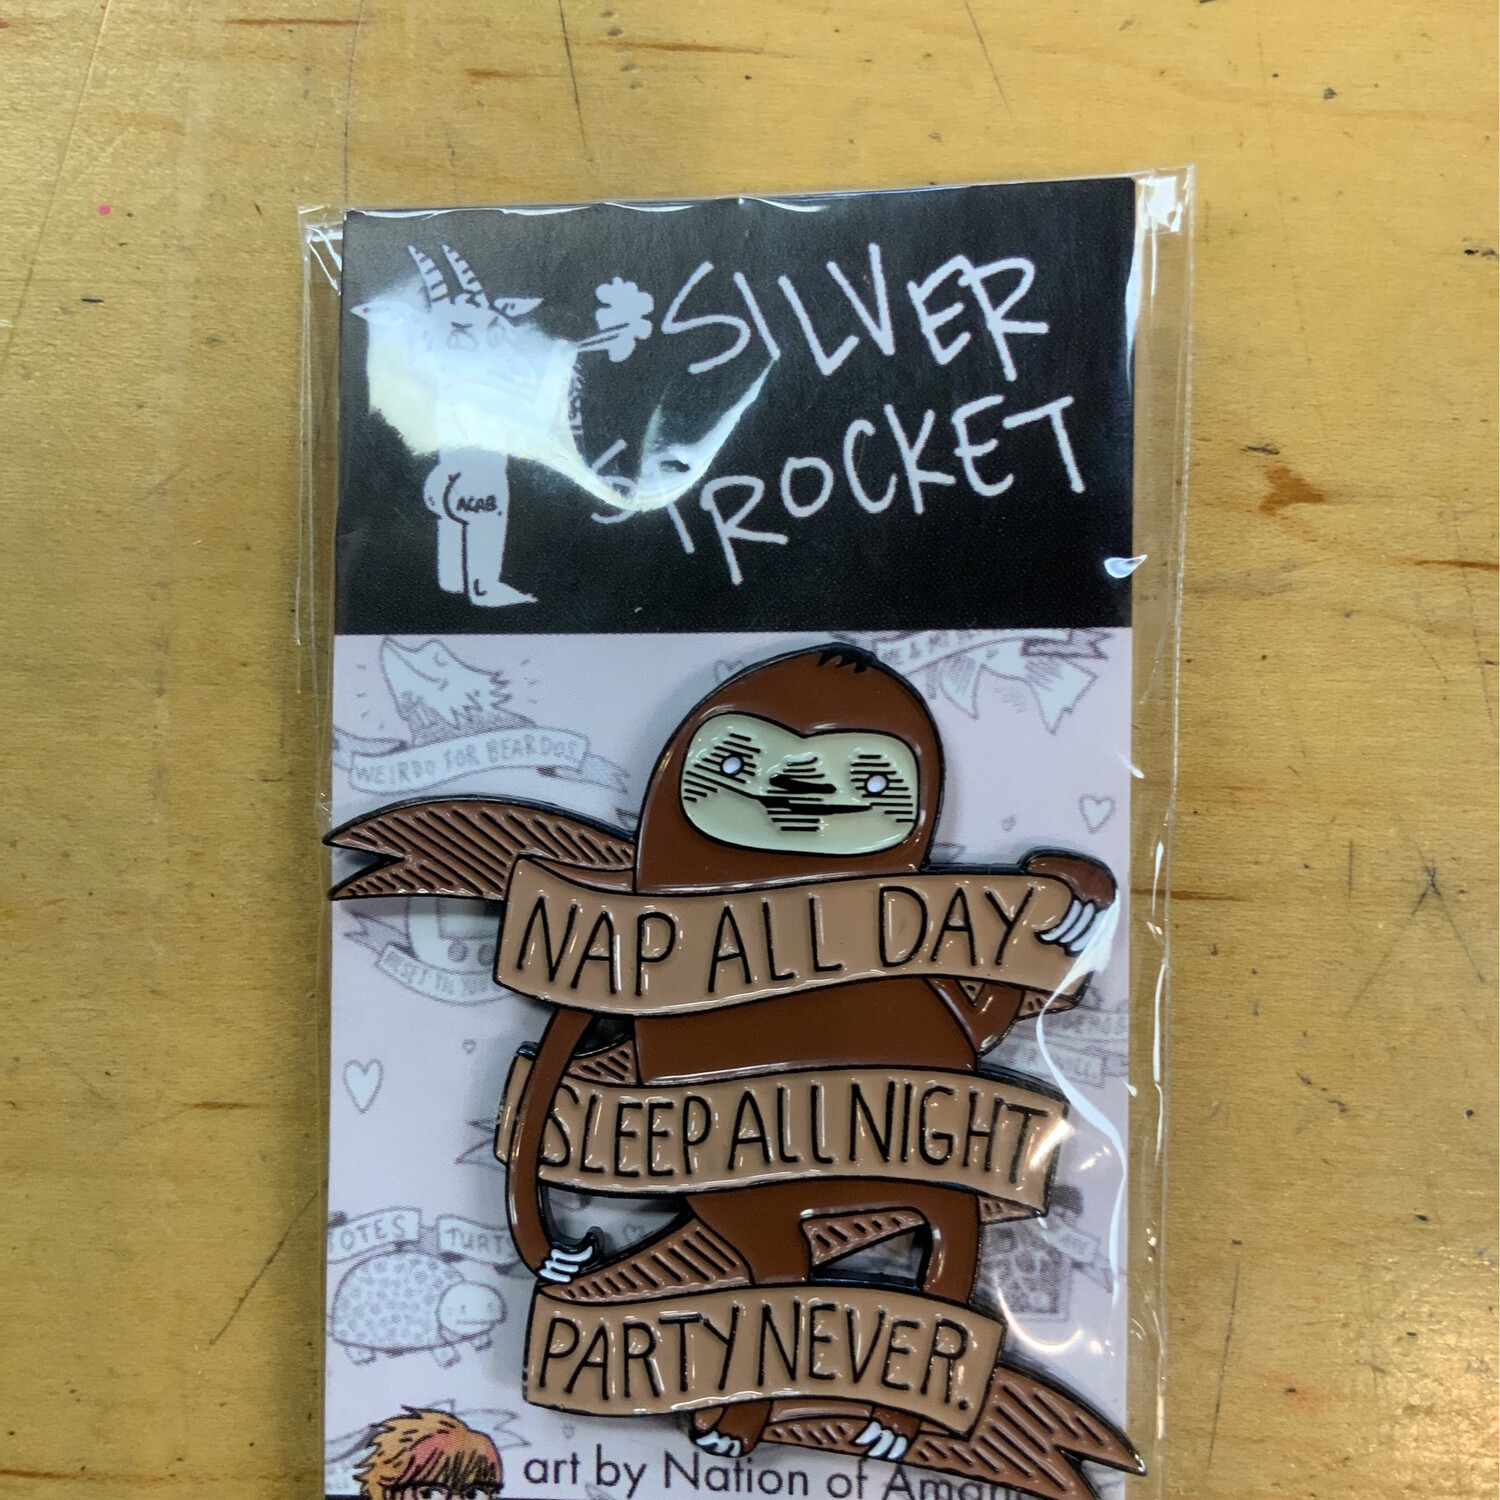 Nap All Day, Sleep All Night, Party Never - Enamel Pin by Nation of Amanda